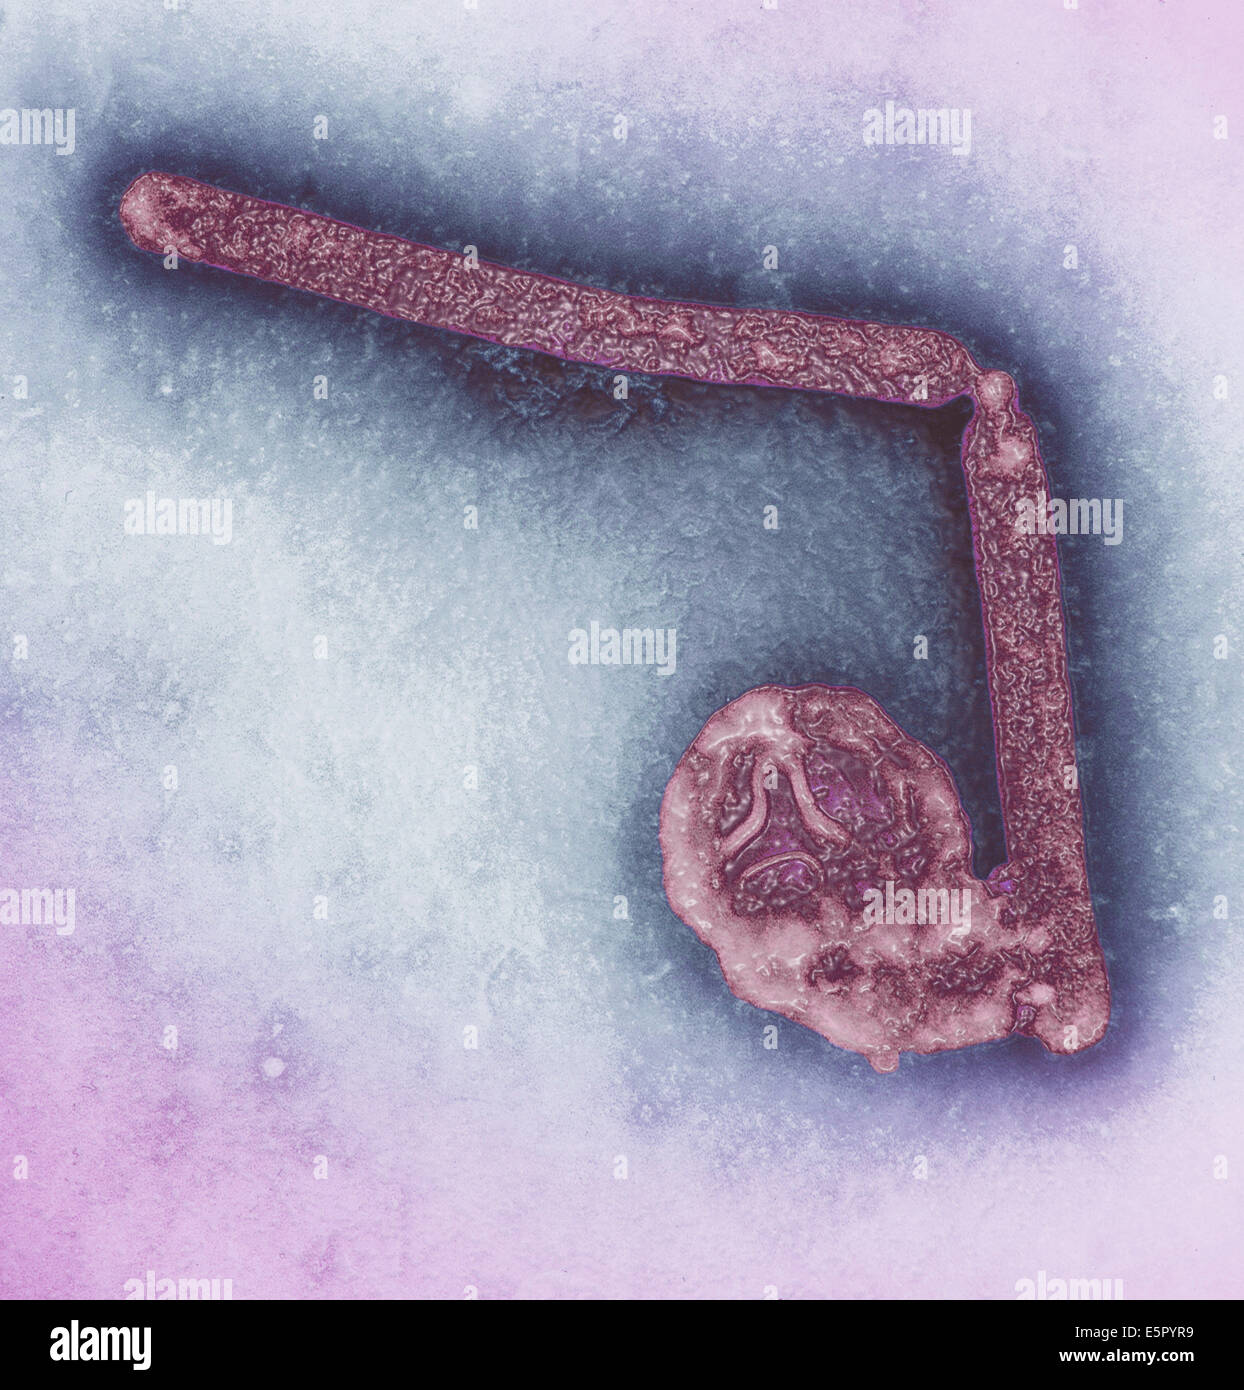 Transmission electron micrograph (TEM) of two avian influenza A H5N1 viruses, Magnification x 108,000. Stock Photo